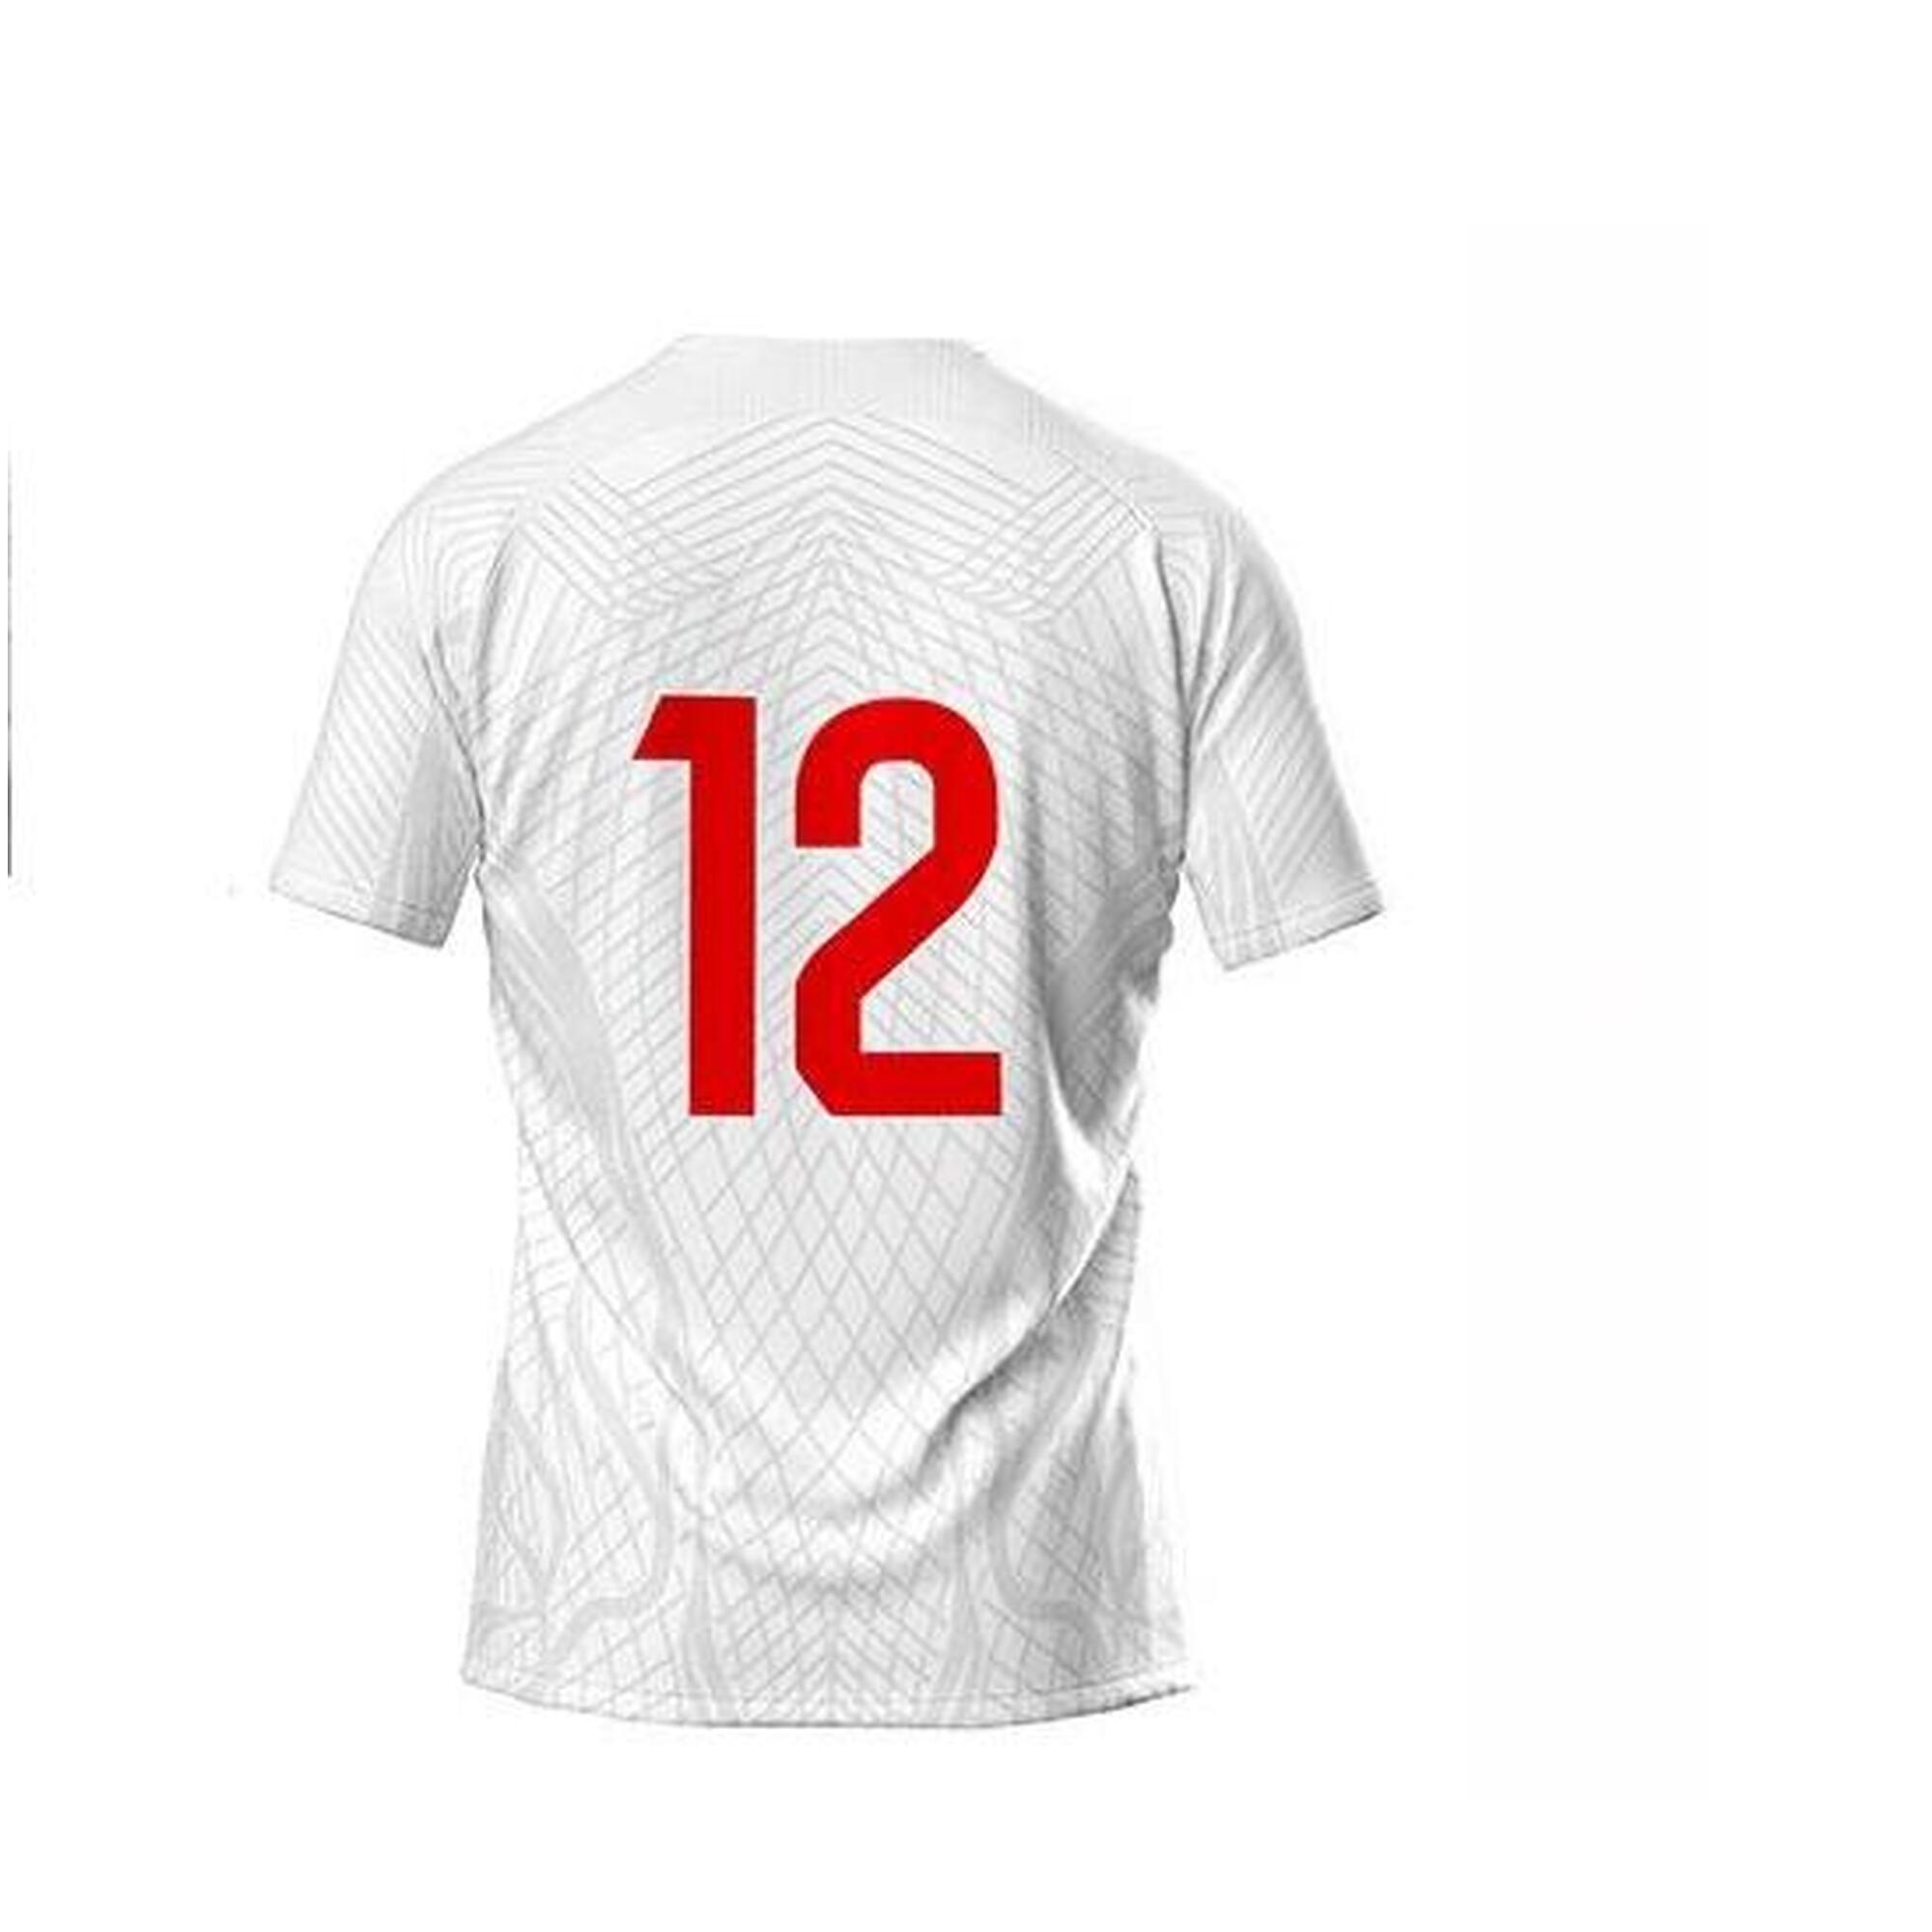 (Limited Stock) Hong Kong Fan Support Match Feel - Jersey (White - S)